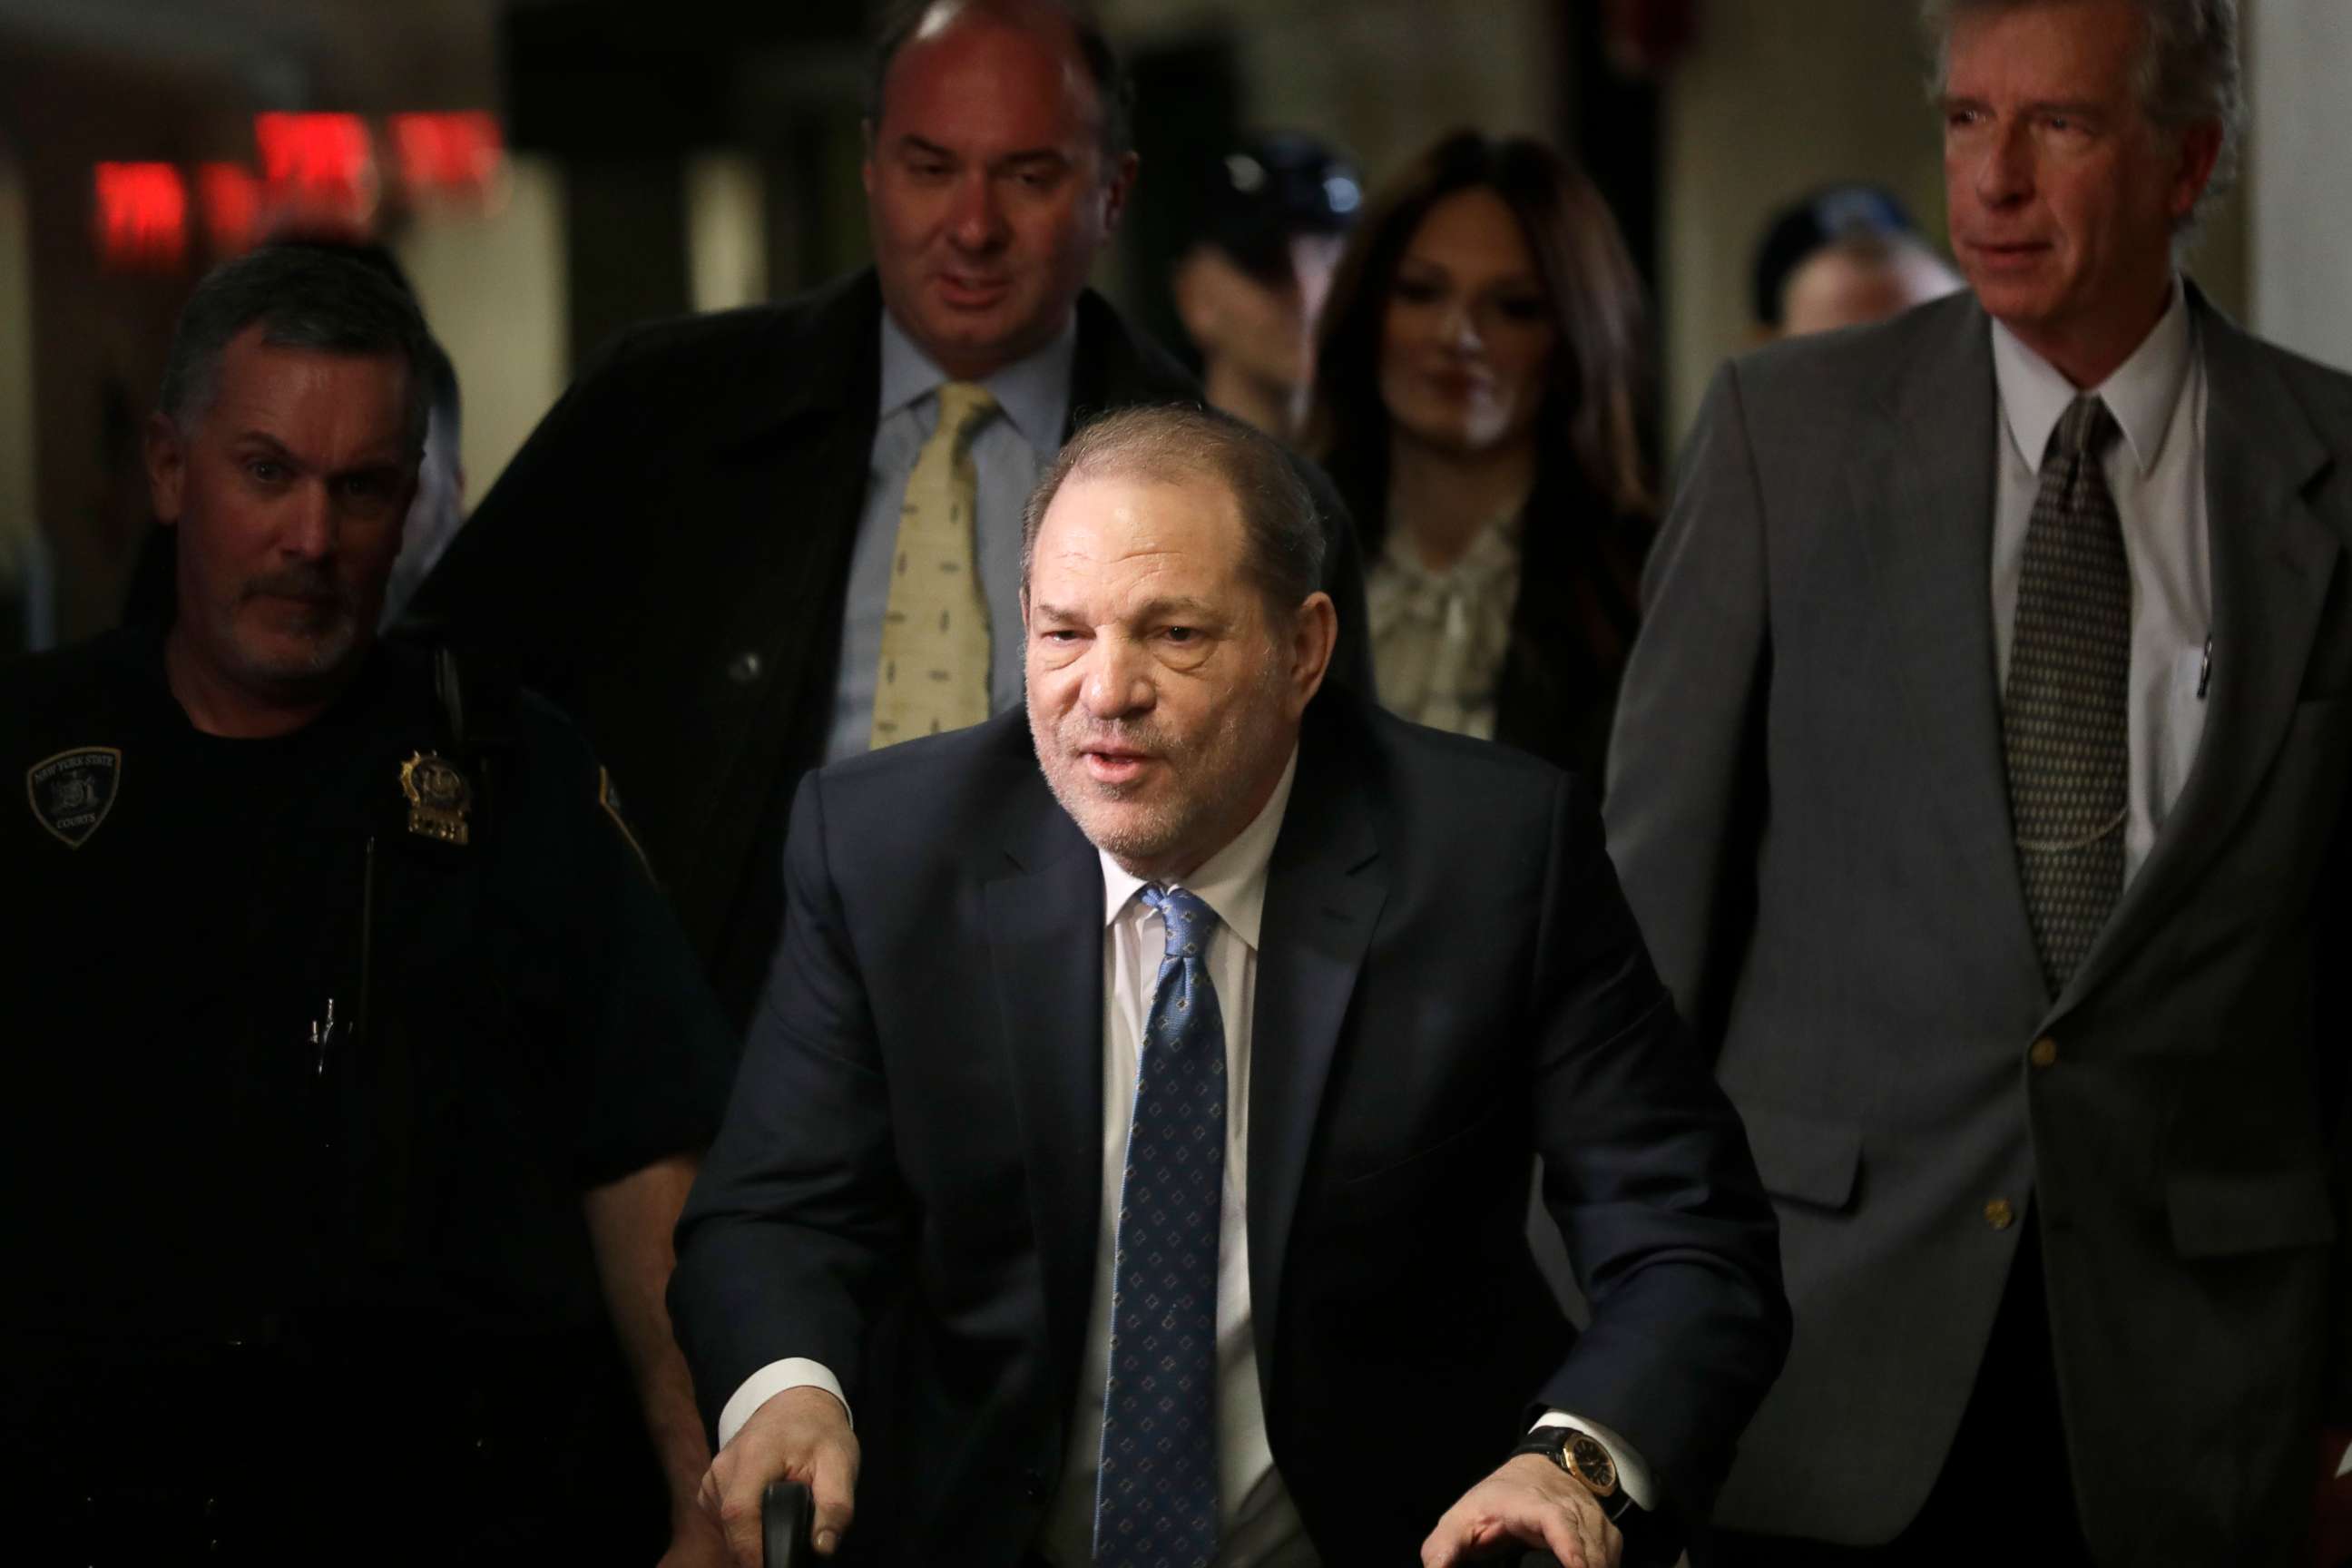 PHOTO: Harvey Weinstein arrives at a Manhattan courthouse for jury deliberations in his rape trial, Monday, Feb. 24, 2020, in New York.